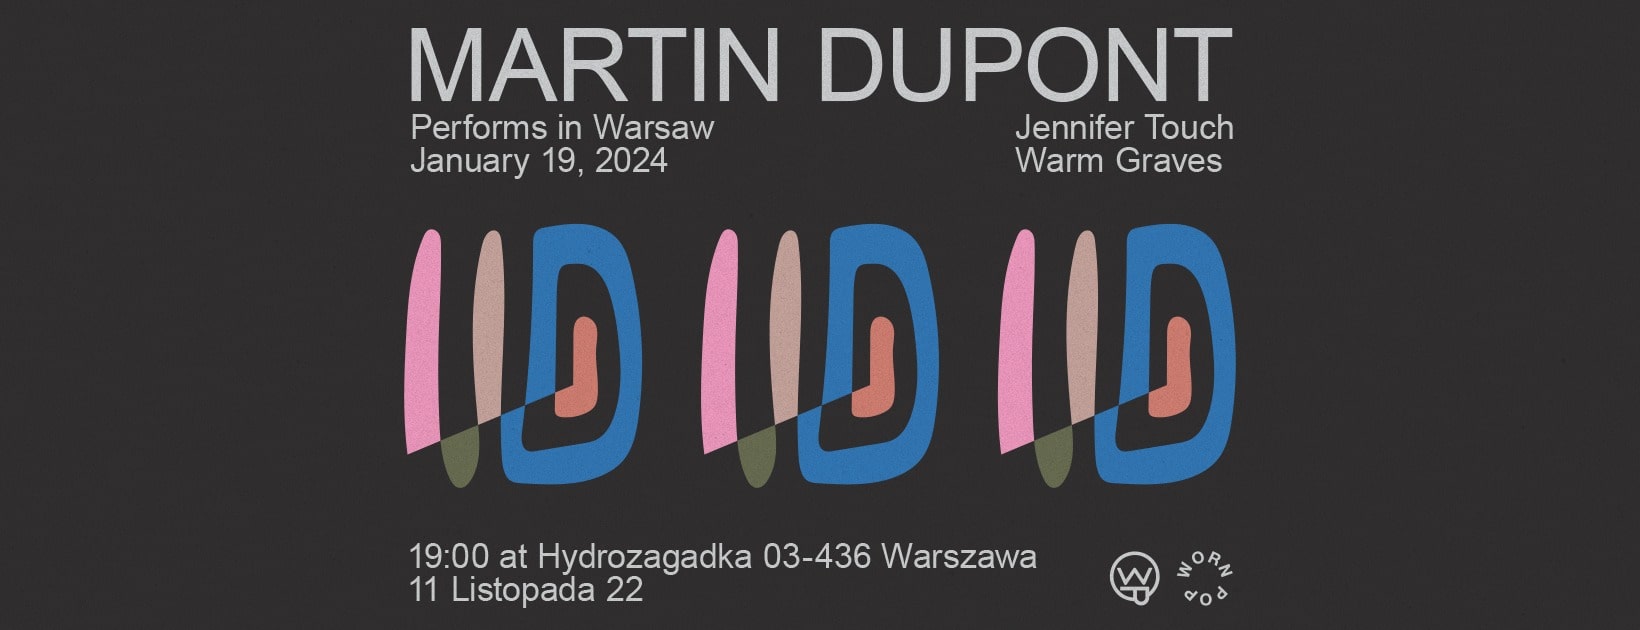 Martin Dupont – live in Warsaw w/ Jennifer Touch and Warm Graves